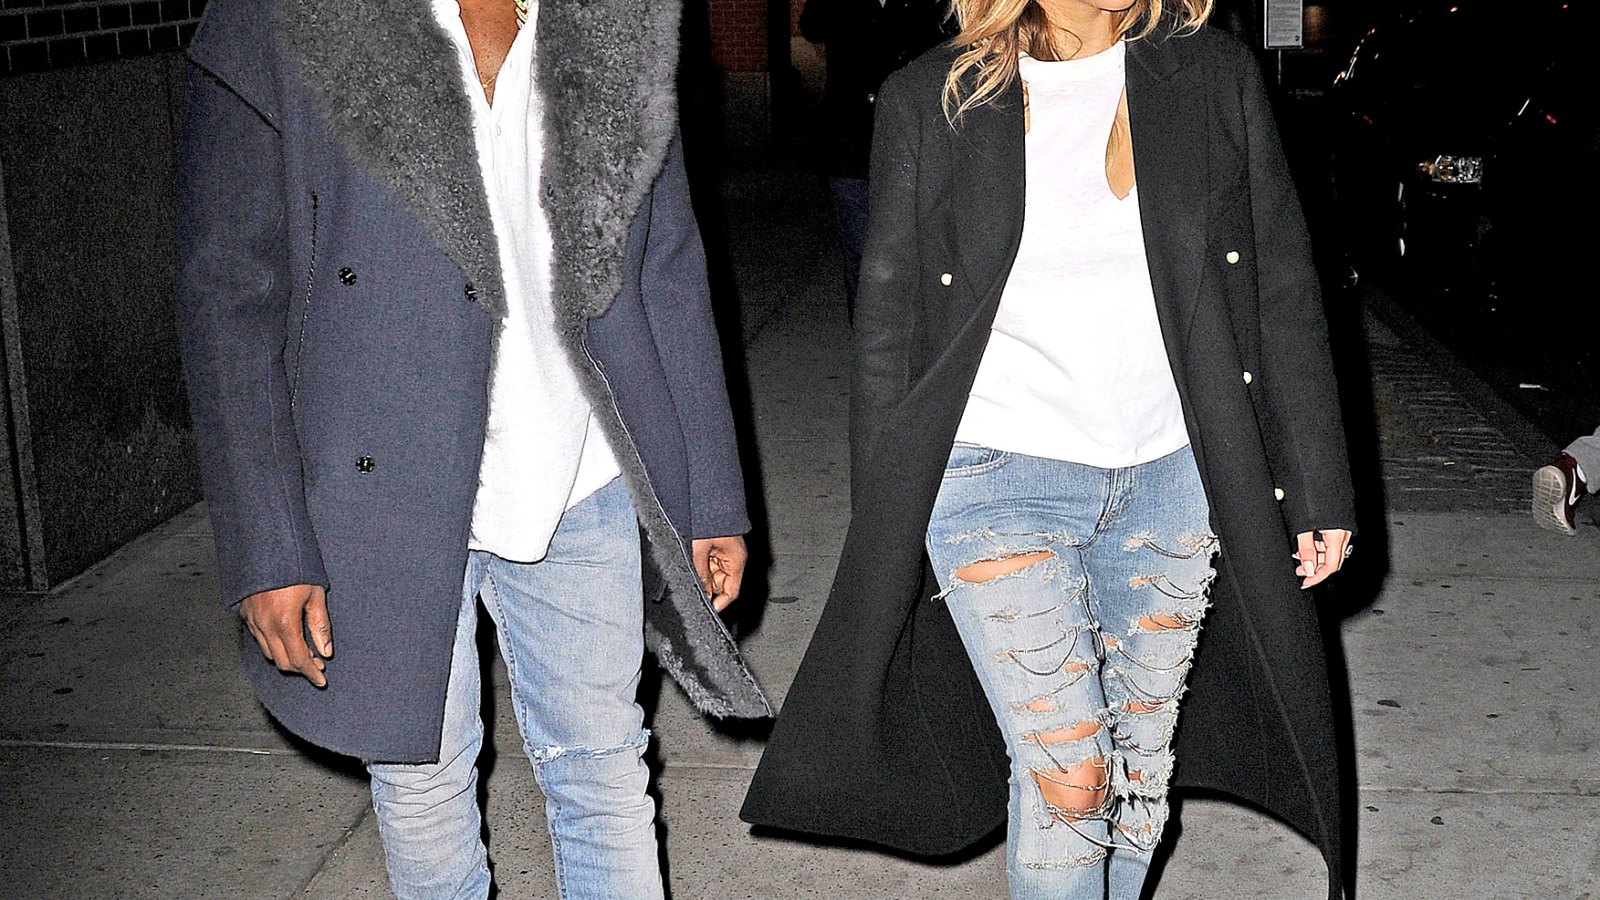 Kanye West and Kim Kardashian are seen on November 20, 2013 in NYC